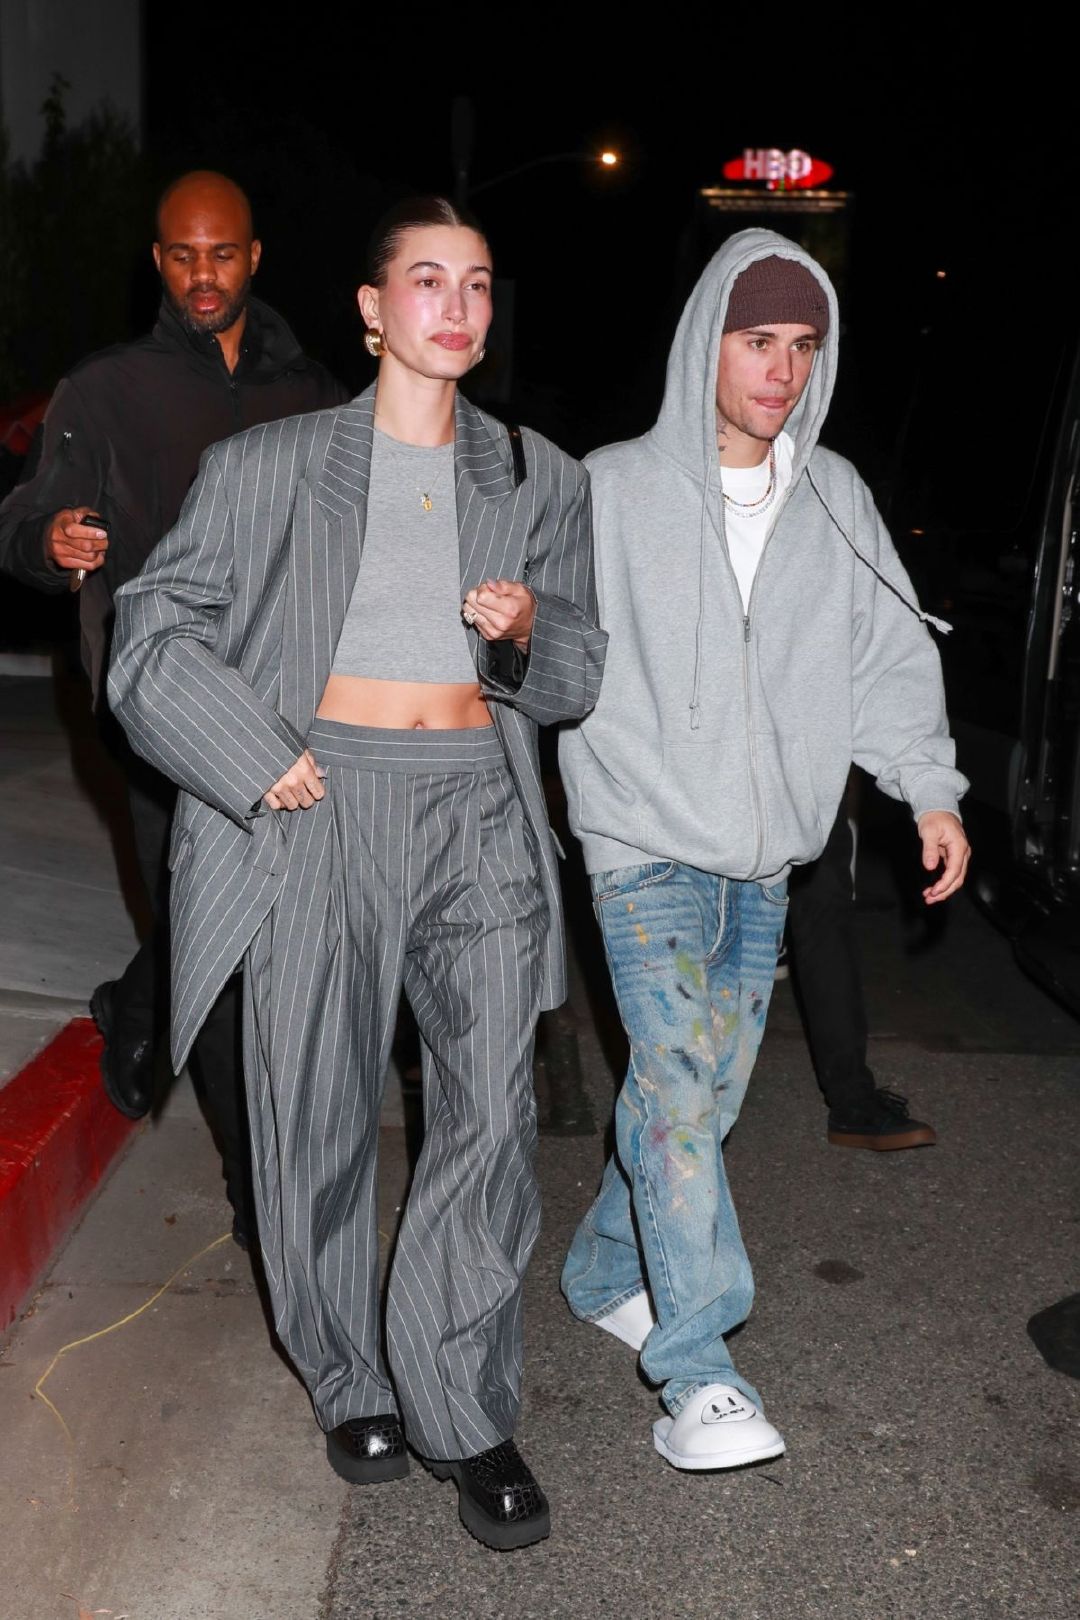 Hailey and Justin Bieber Arrives at the Birds Club in Los Angeles